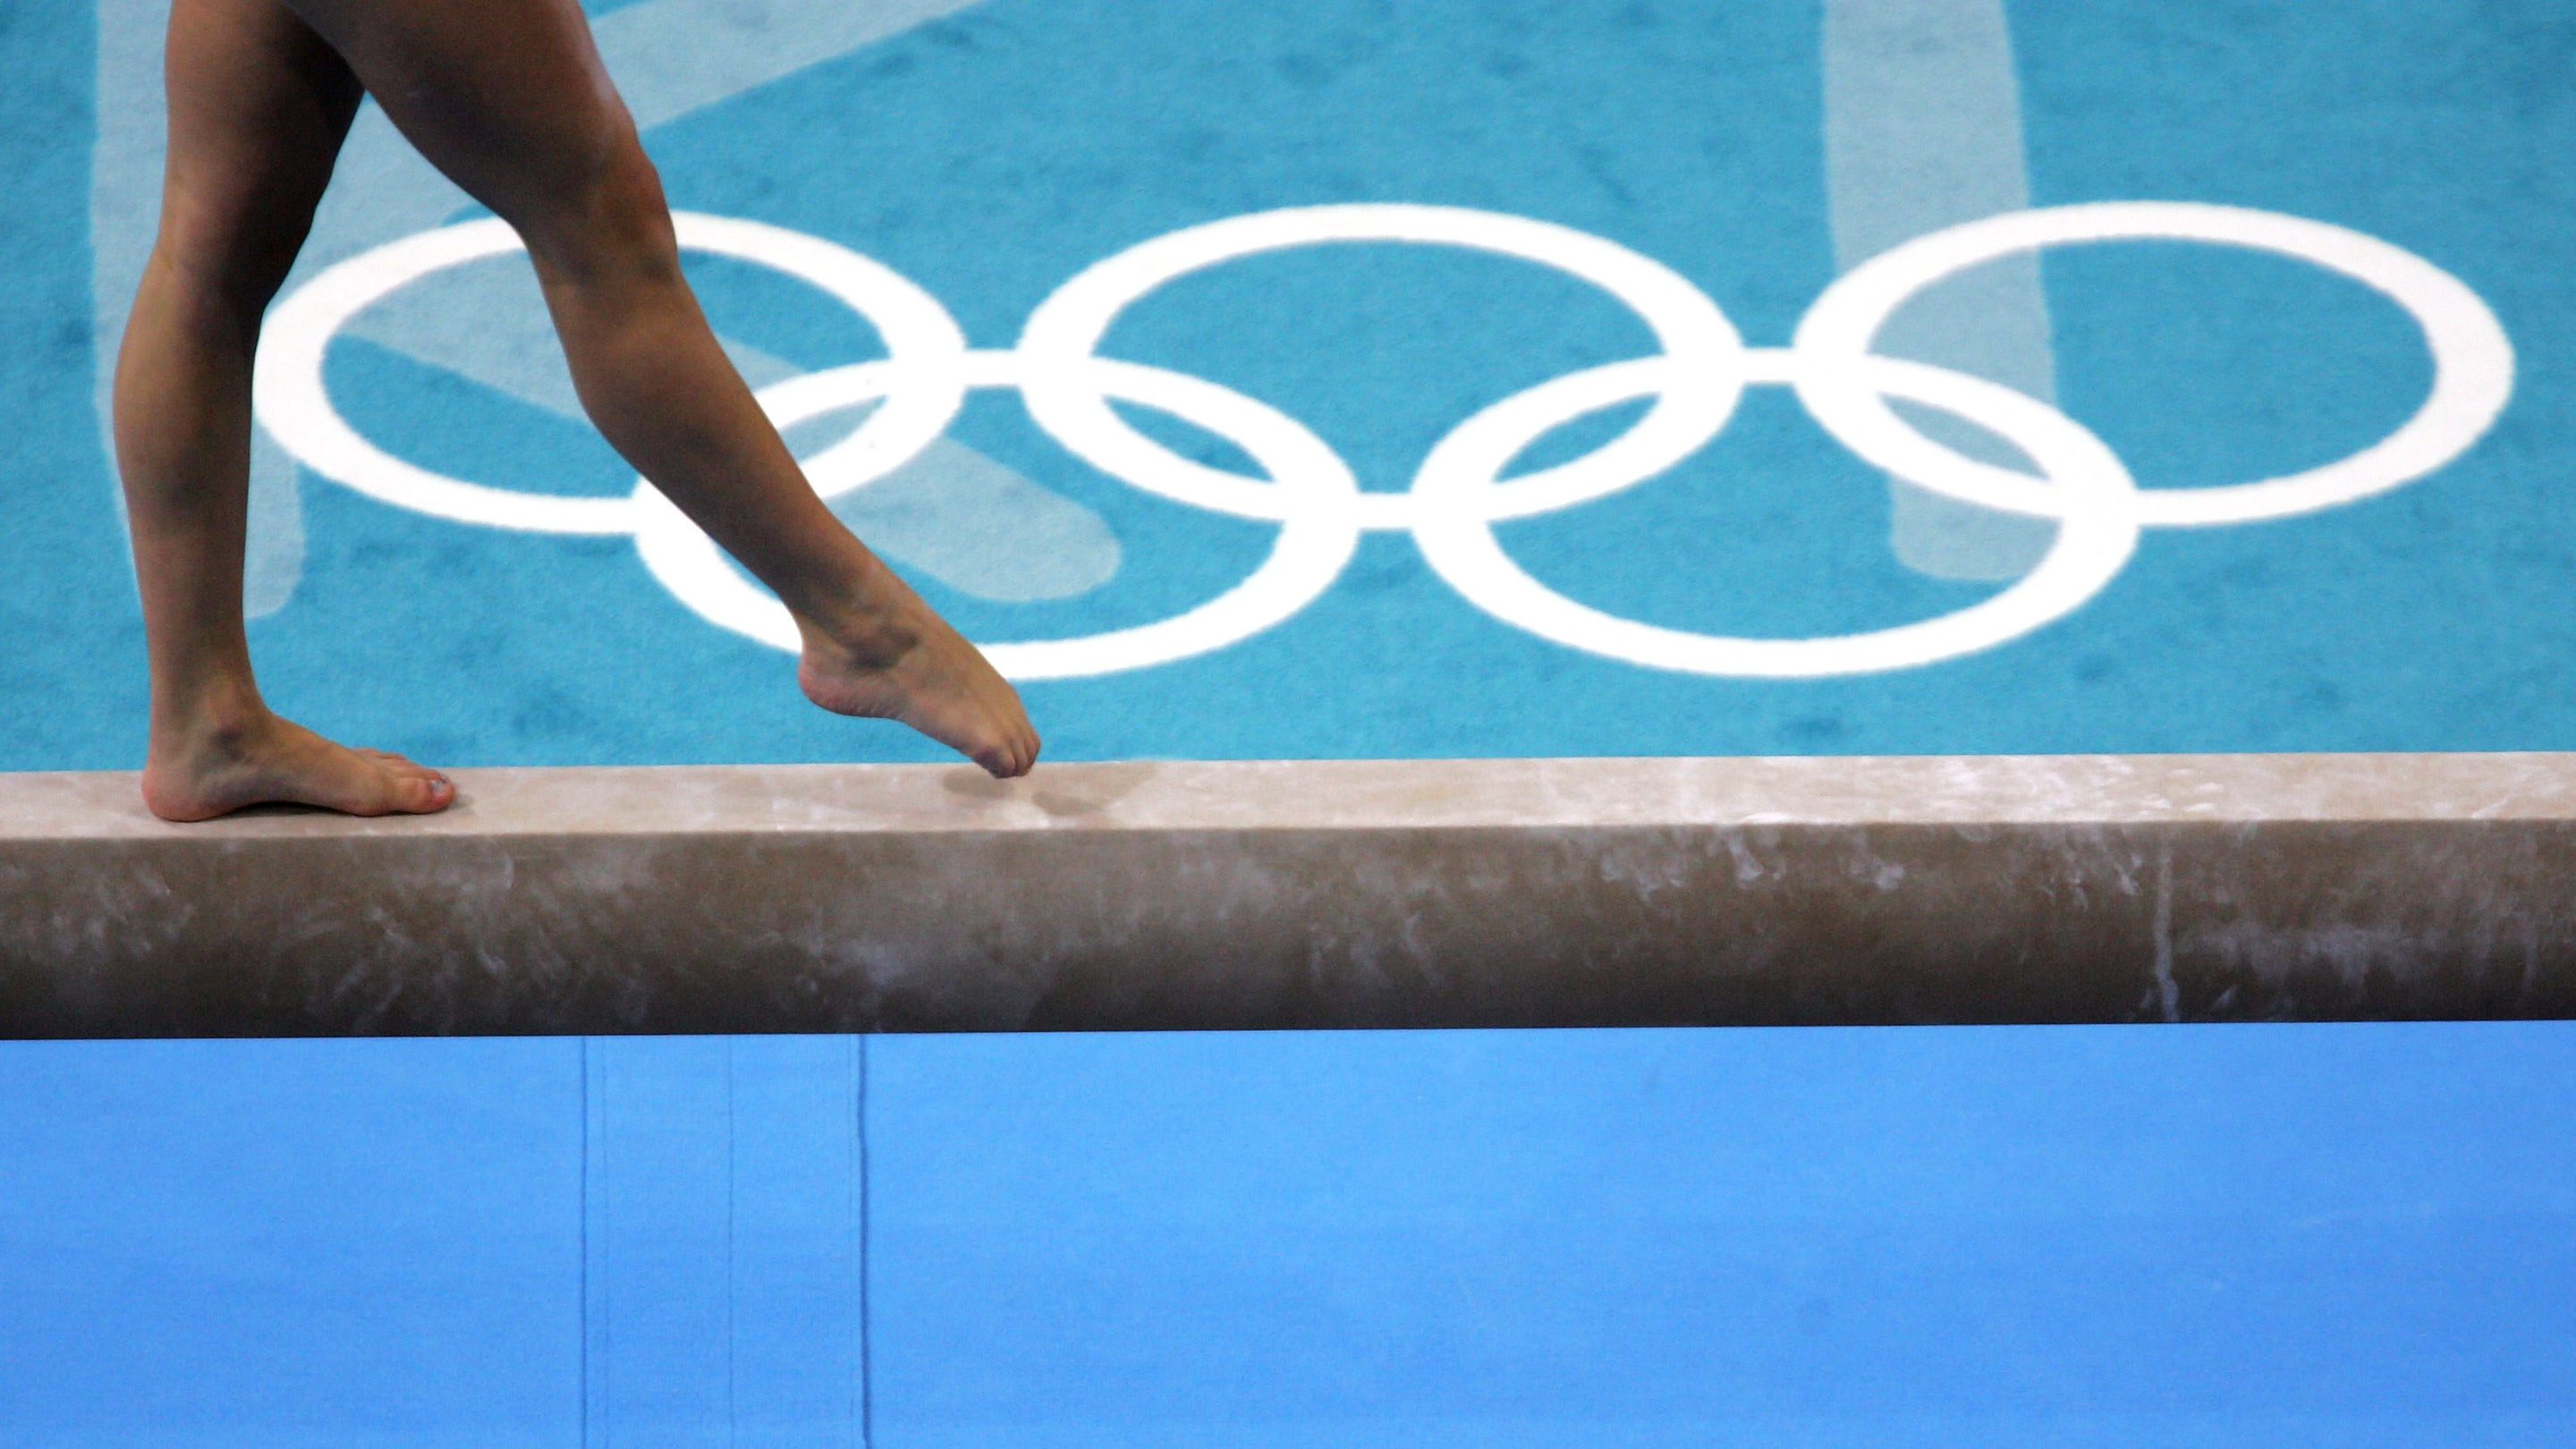 General view during the balance beam exercise at the women's artistic gymnastics individual competition on August 19, 2004 during the Athens 2004 Summer Olympic Games at the Olympic Sports Complex Indoor Hall in Athens, Greece.